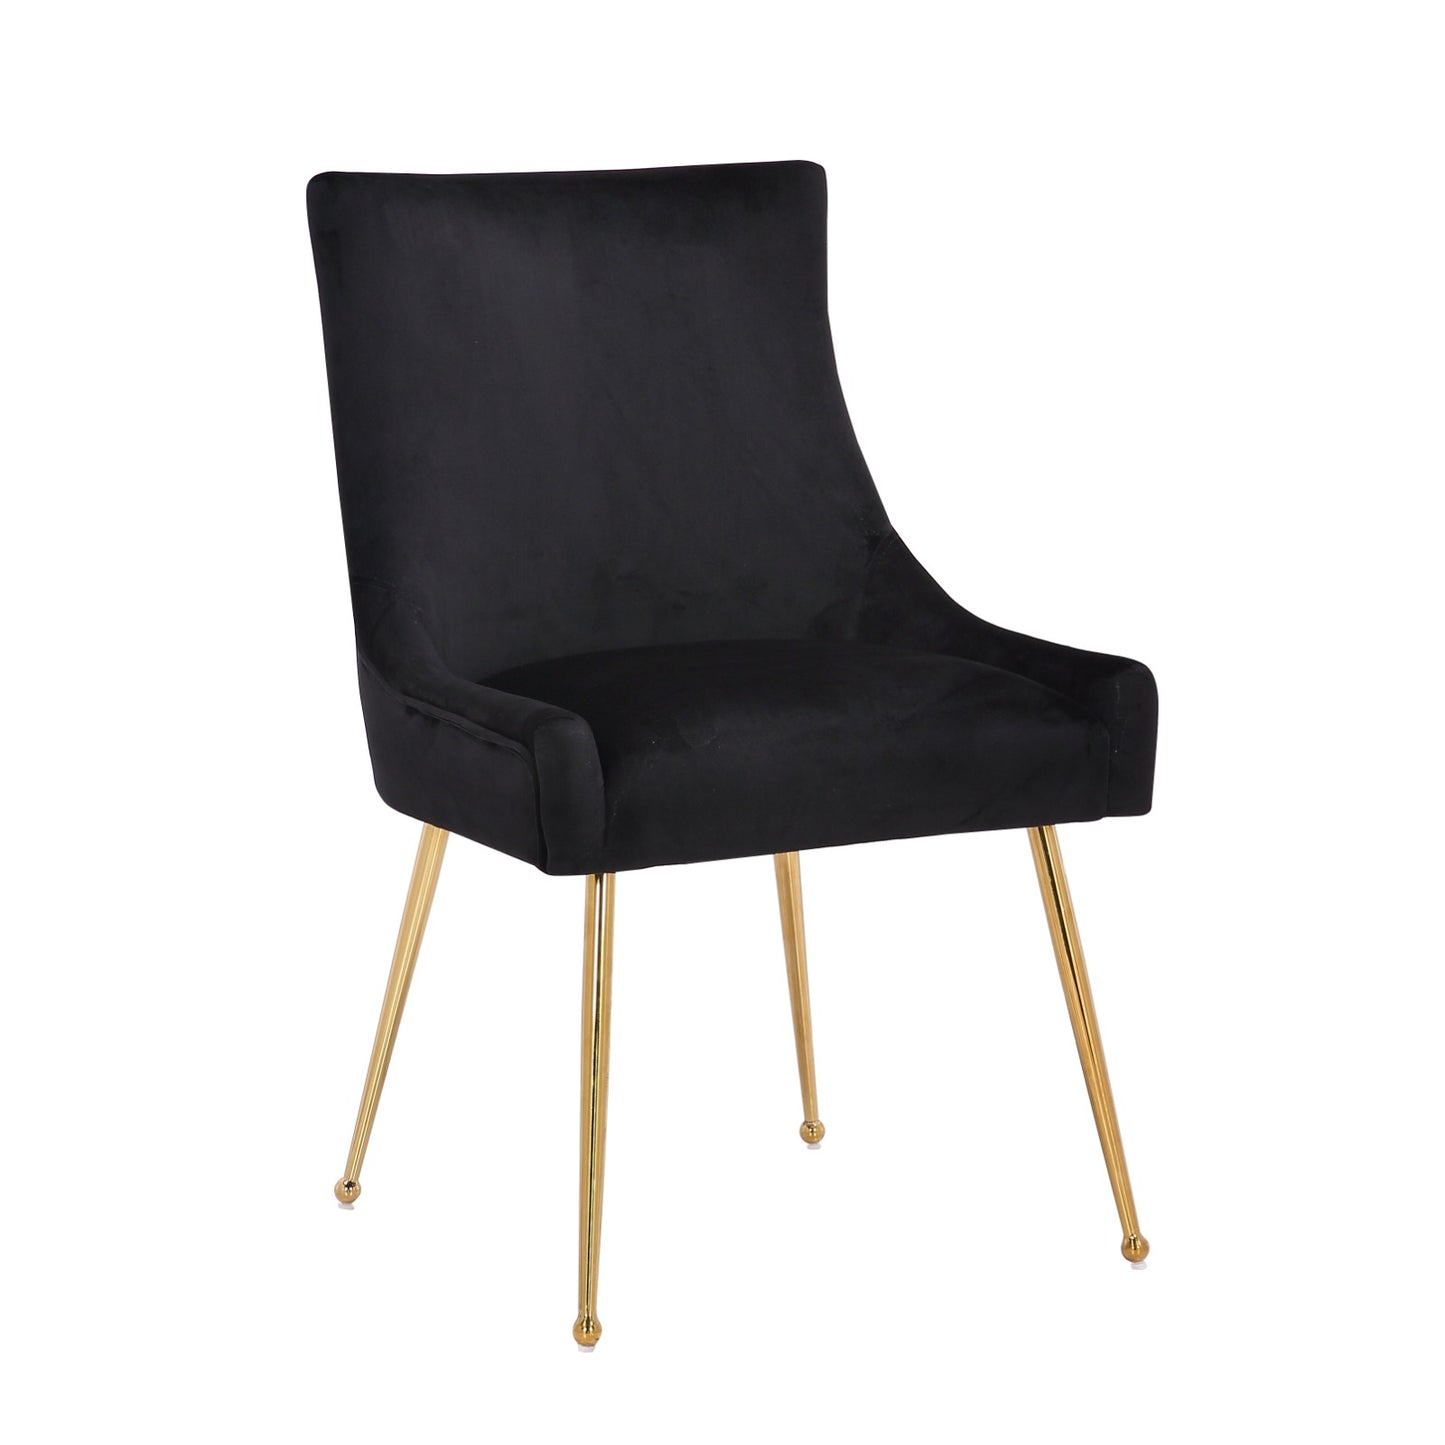 PAIR OF NEW BLACK VELVET ACCENT CHAIR WITH GOLD HANDLE